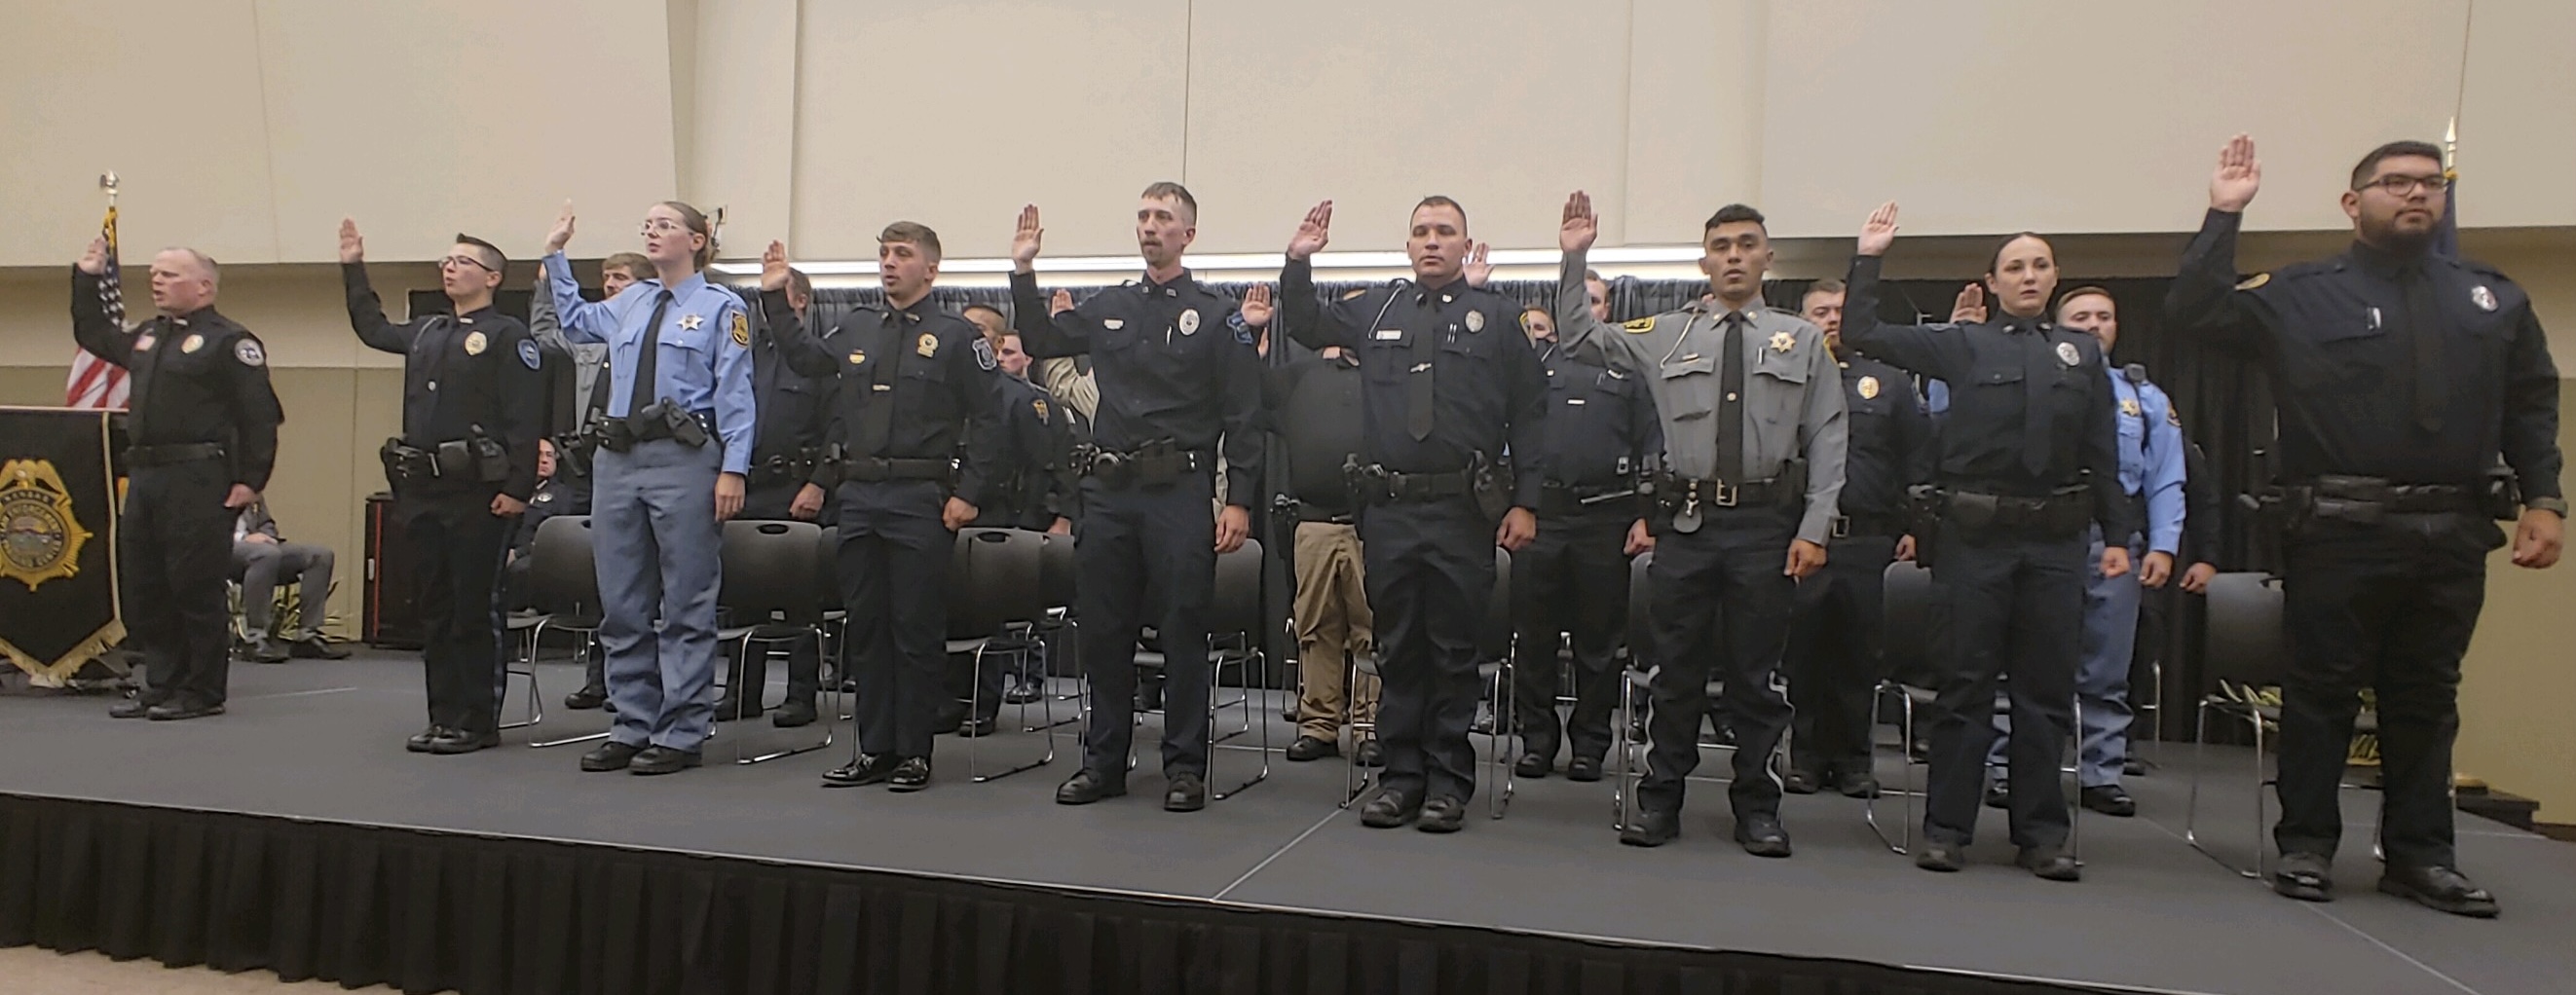 The 299th basic training class recites the oath of office.